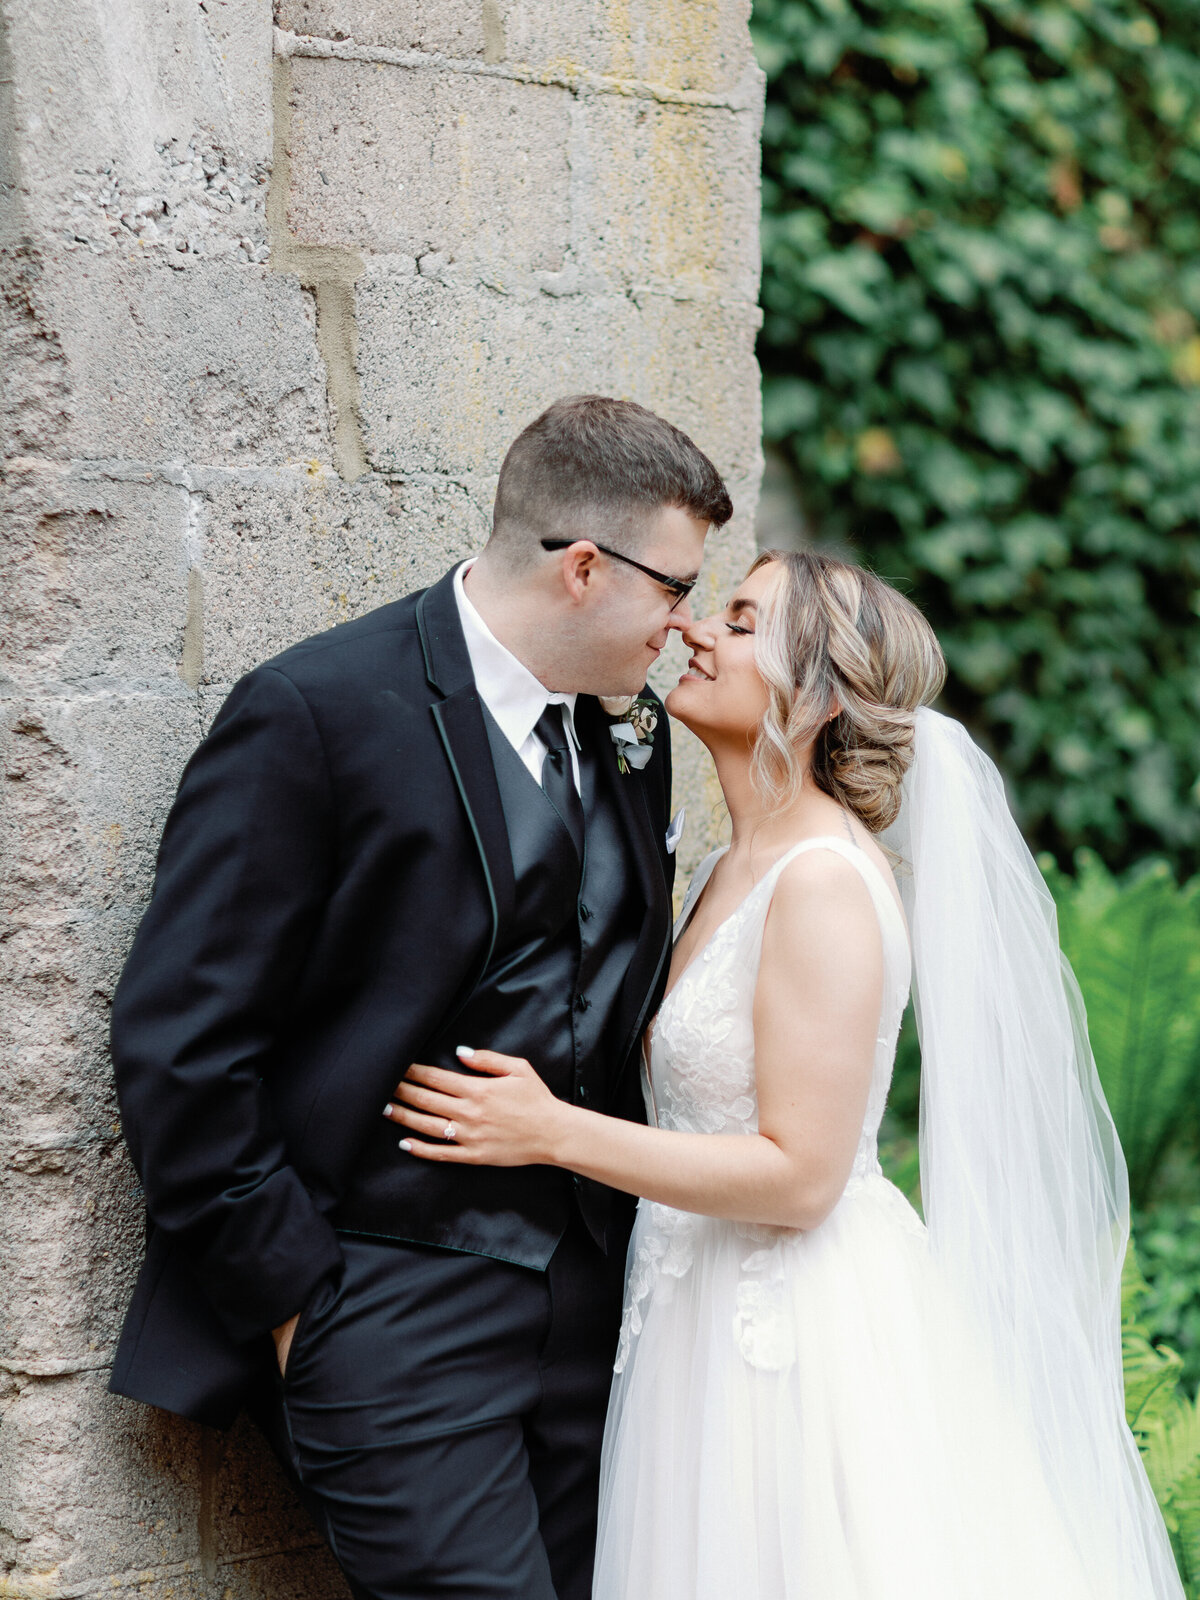 A bride and groom share the moment right before a kiss on their wedding day